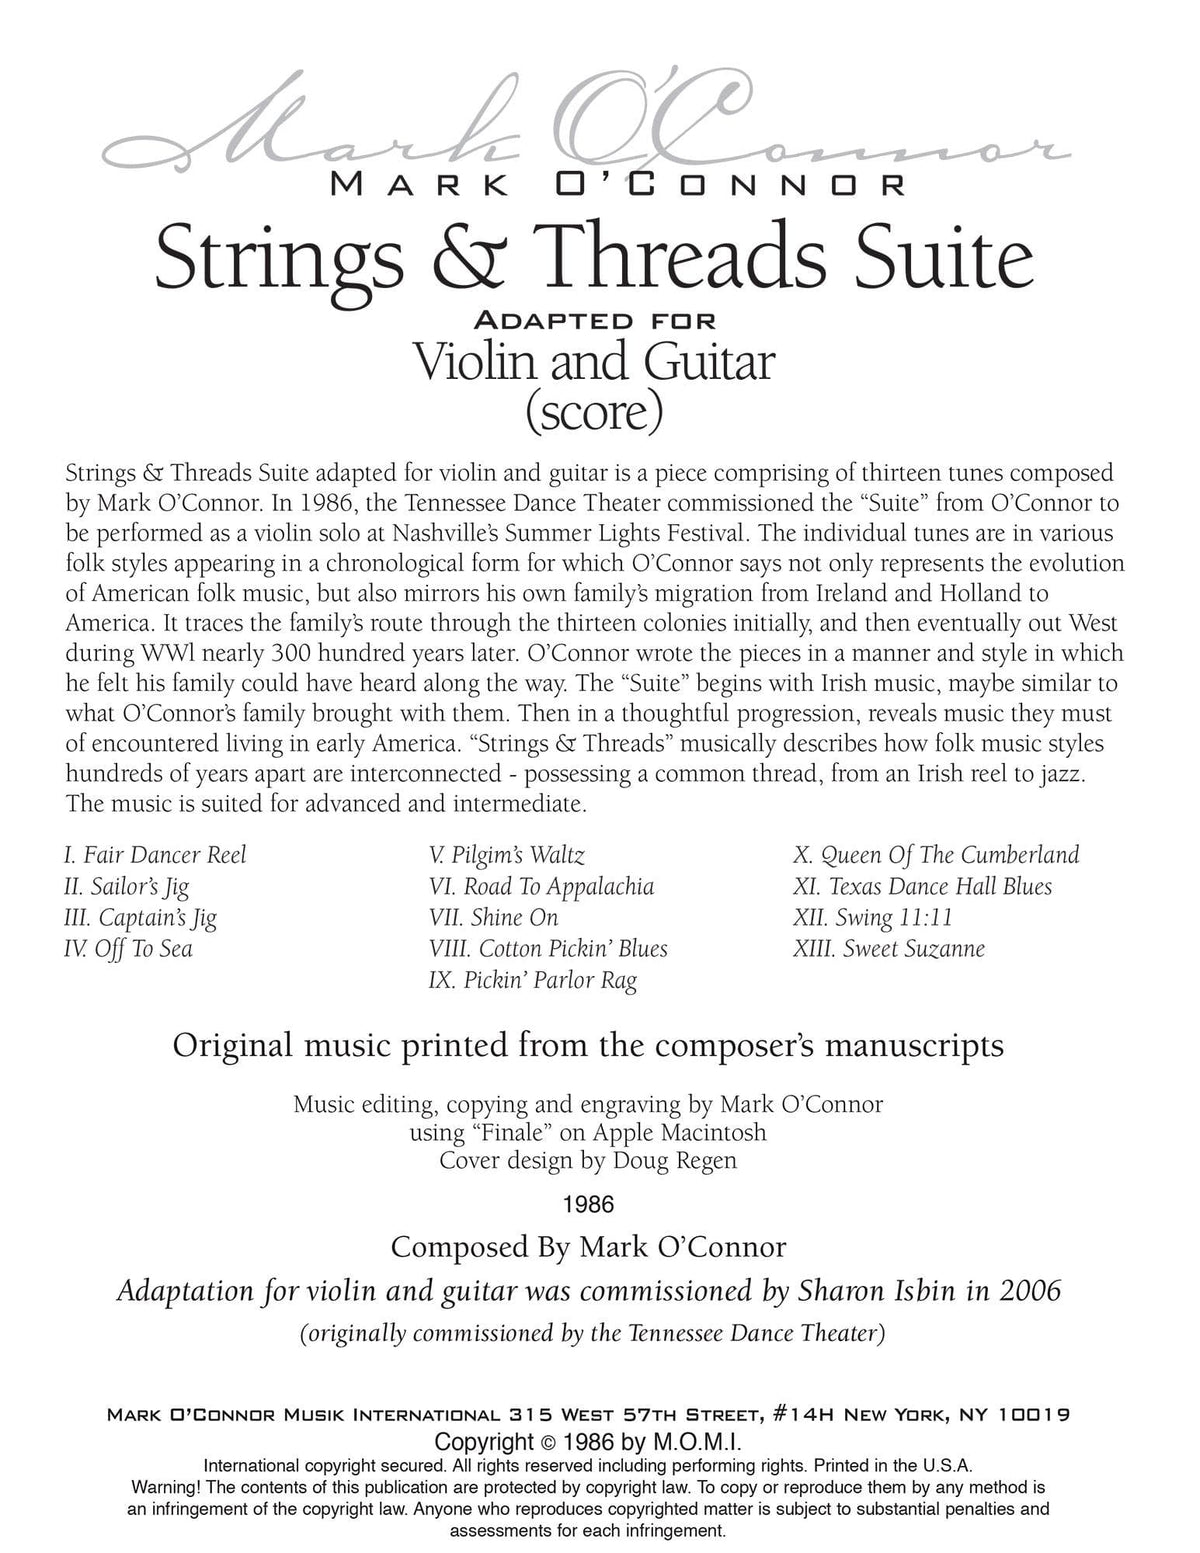 O'Connor, Mark - Strings & Threads Suite for Violin and Guitar - Score - Digital Download